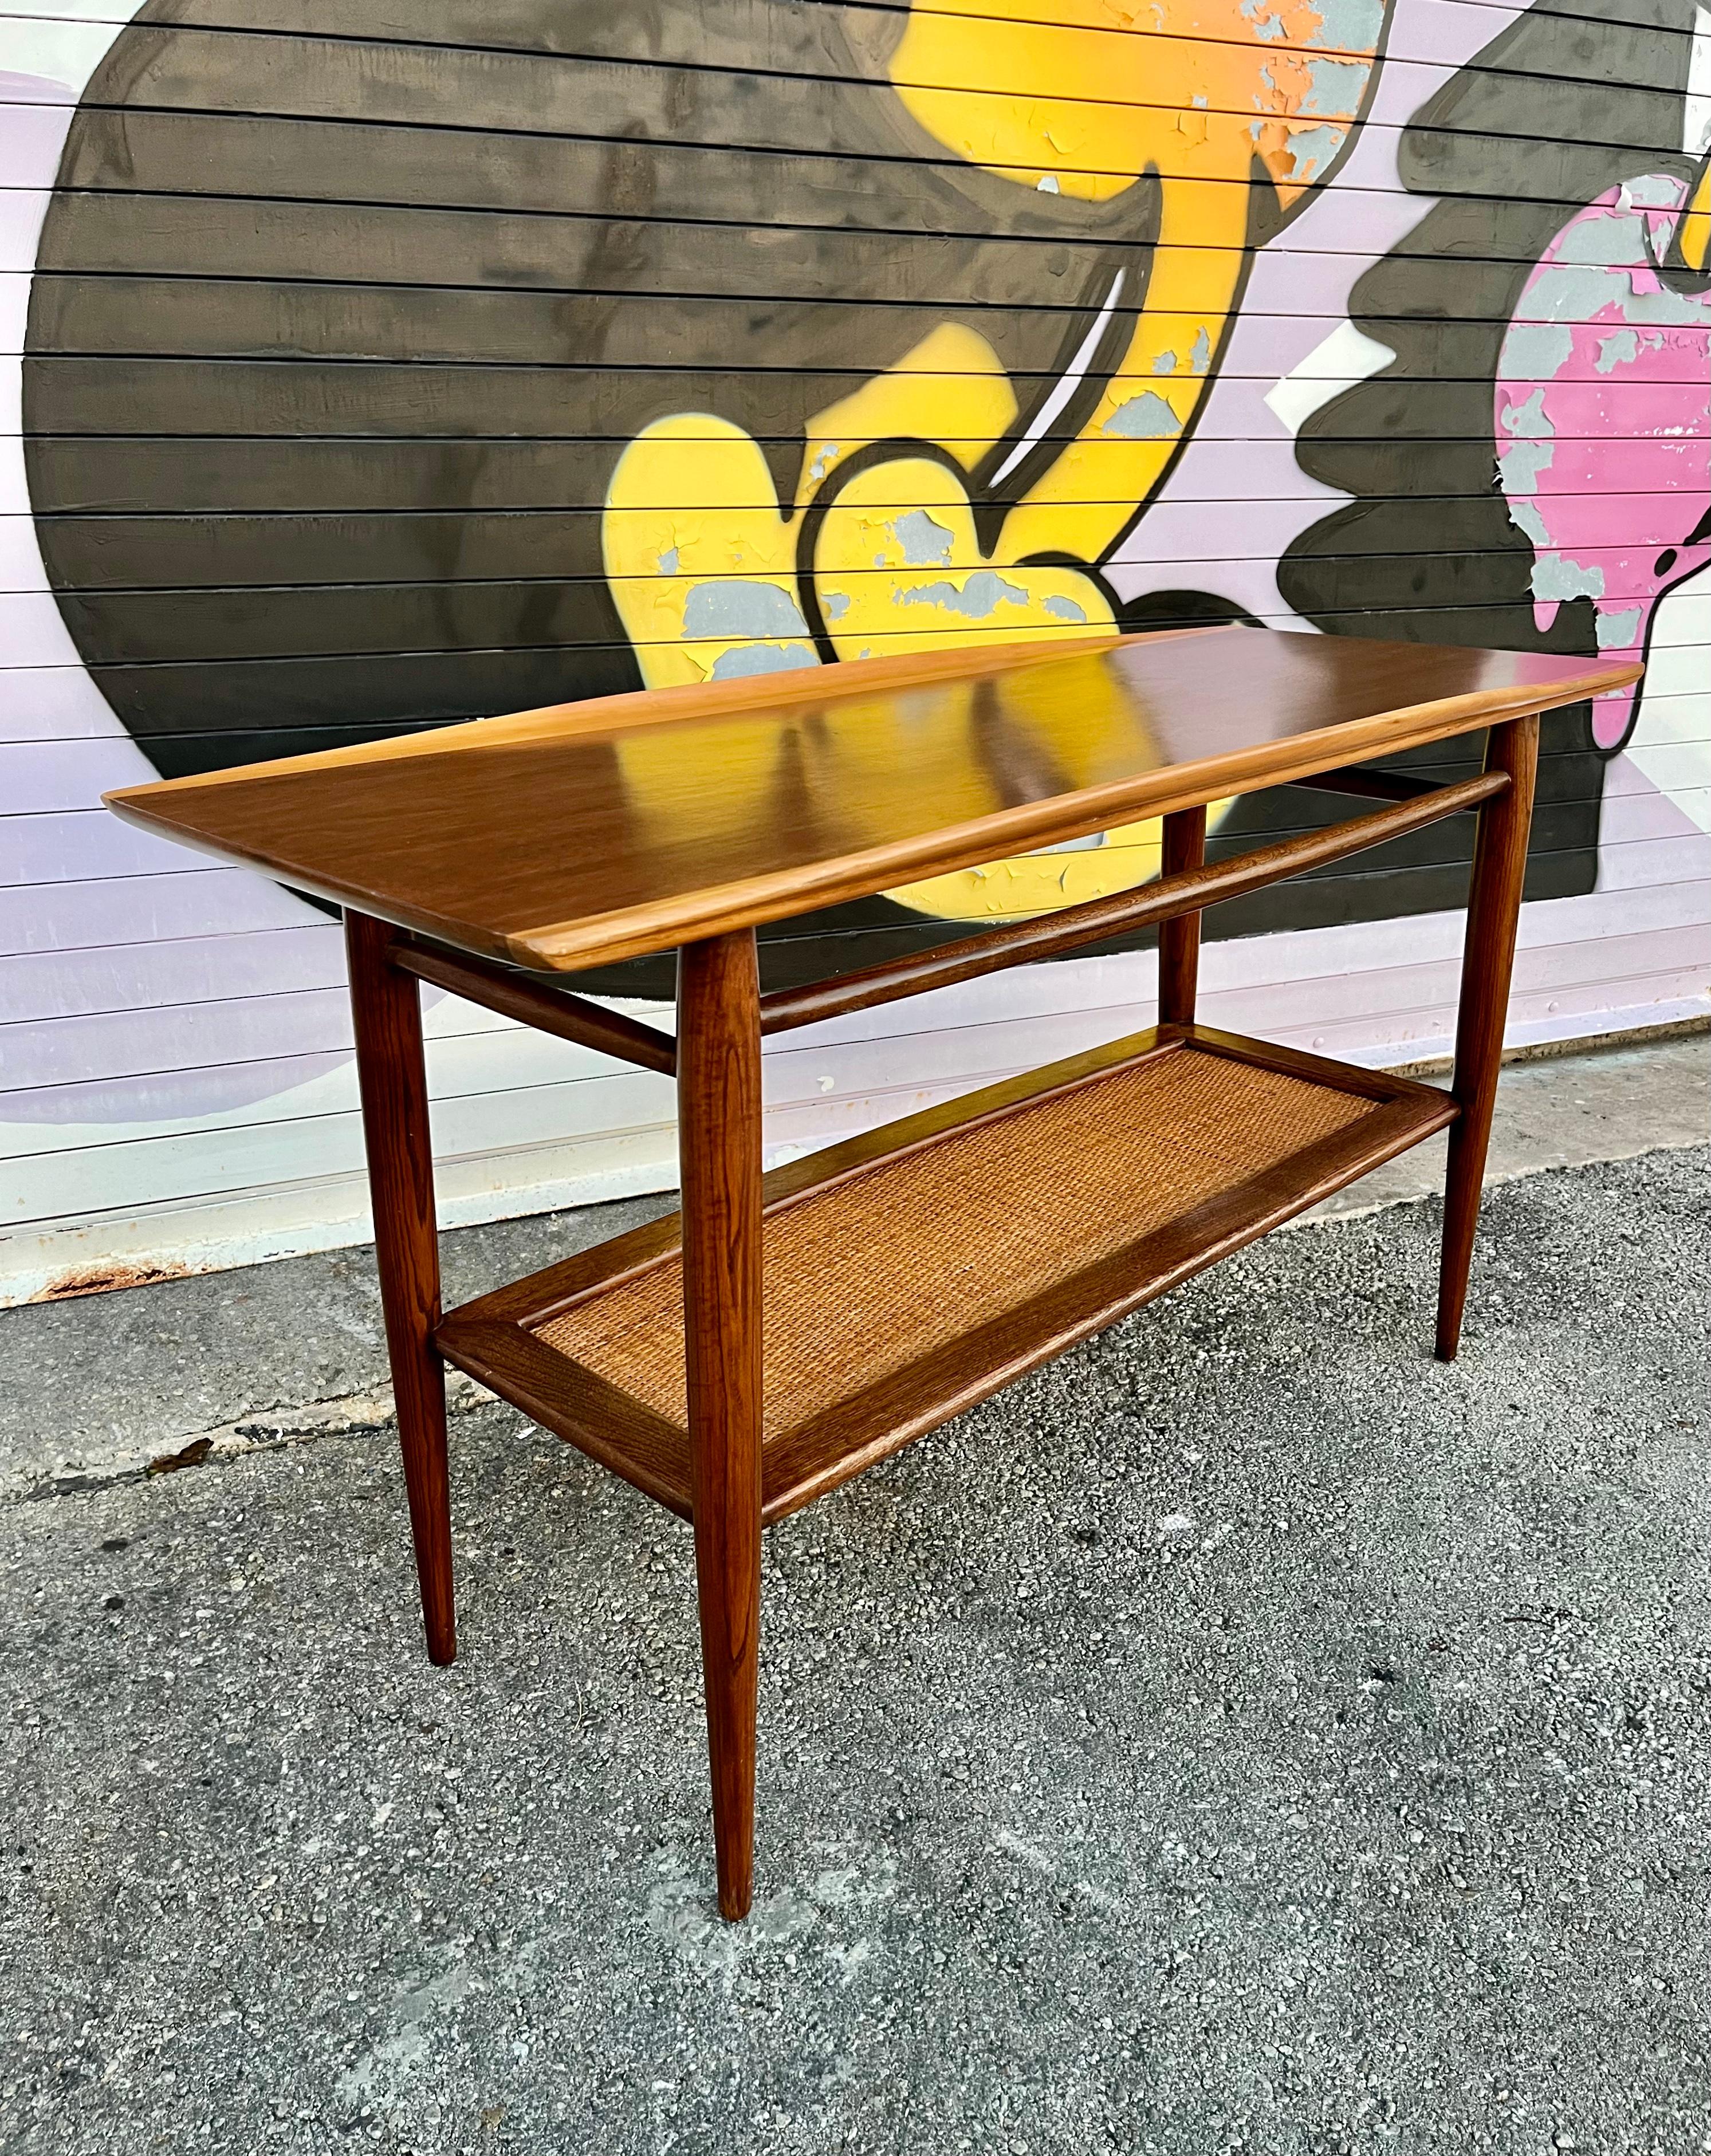 Cane Mid Century Modern Two Tier Console Table by Basset Furniture. Circa 1960s For Sale